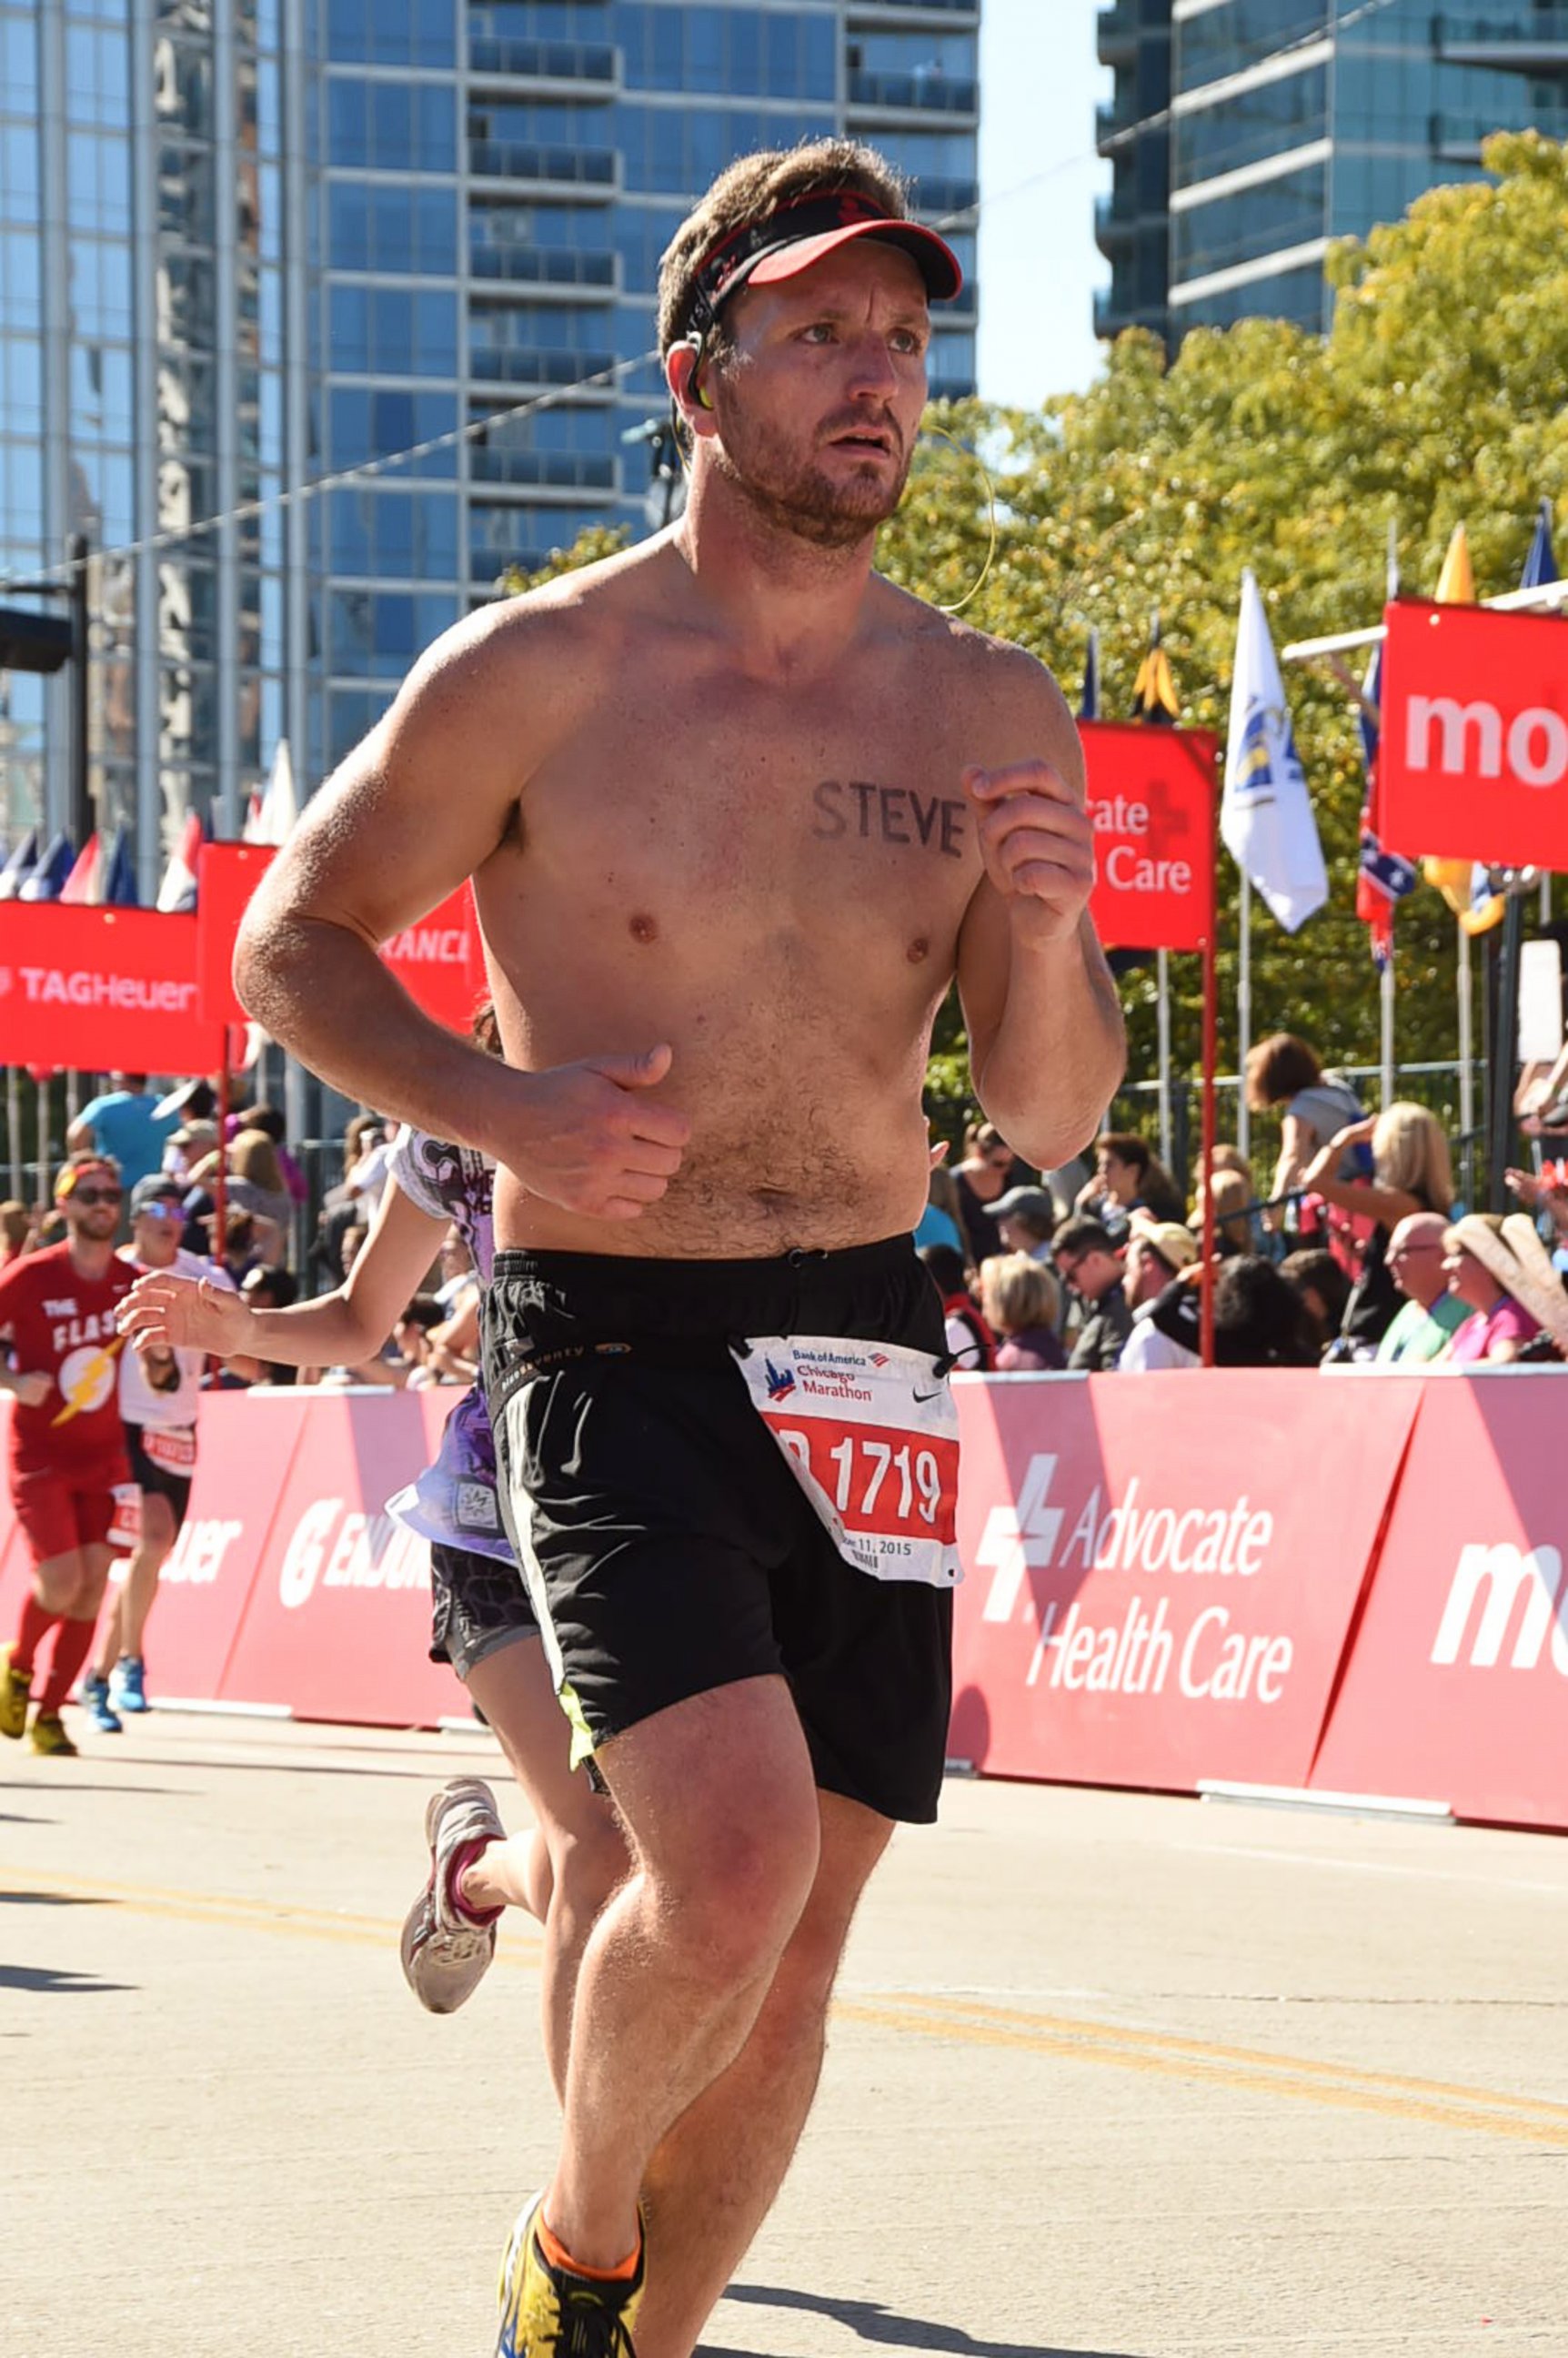 PHOTO: Steve Bergstrom runs the Bank of America Chicago Marathon on Oct. 9, 2015. He decided to use his back as a billboard to cheer the runners and hopefully get a date.